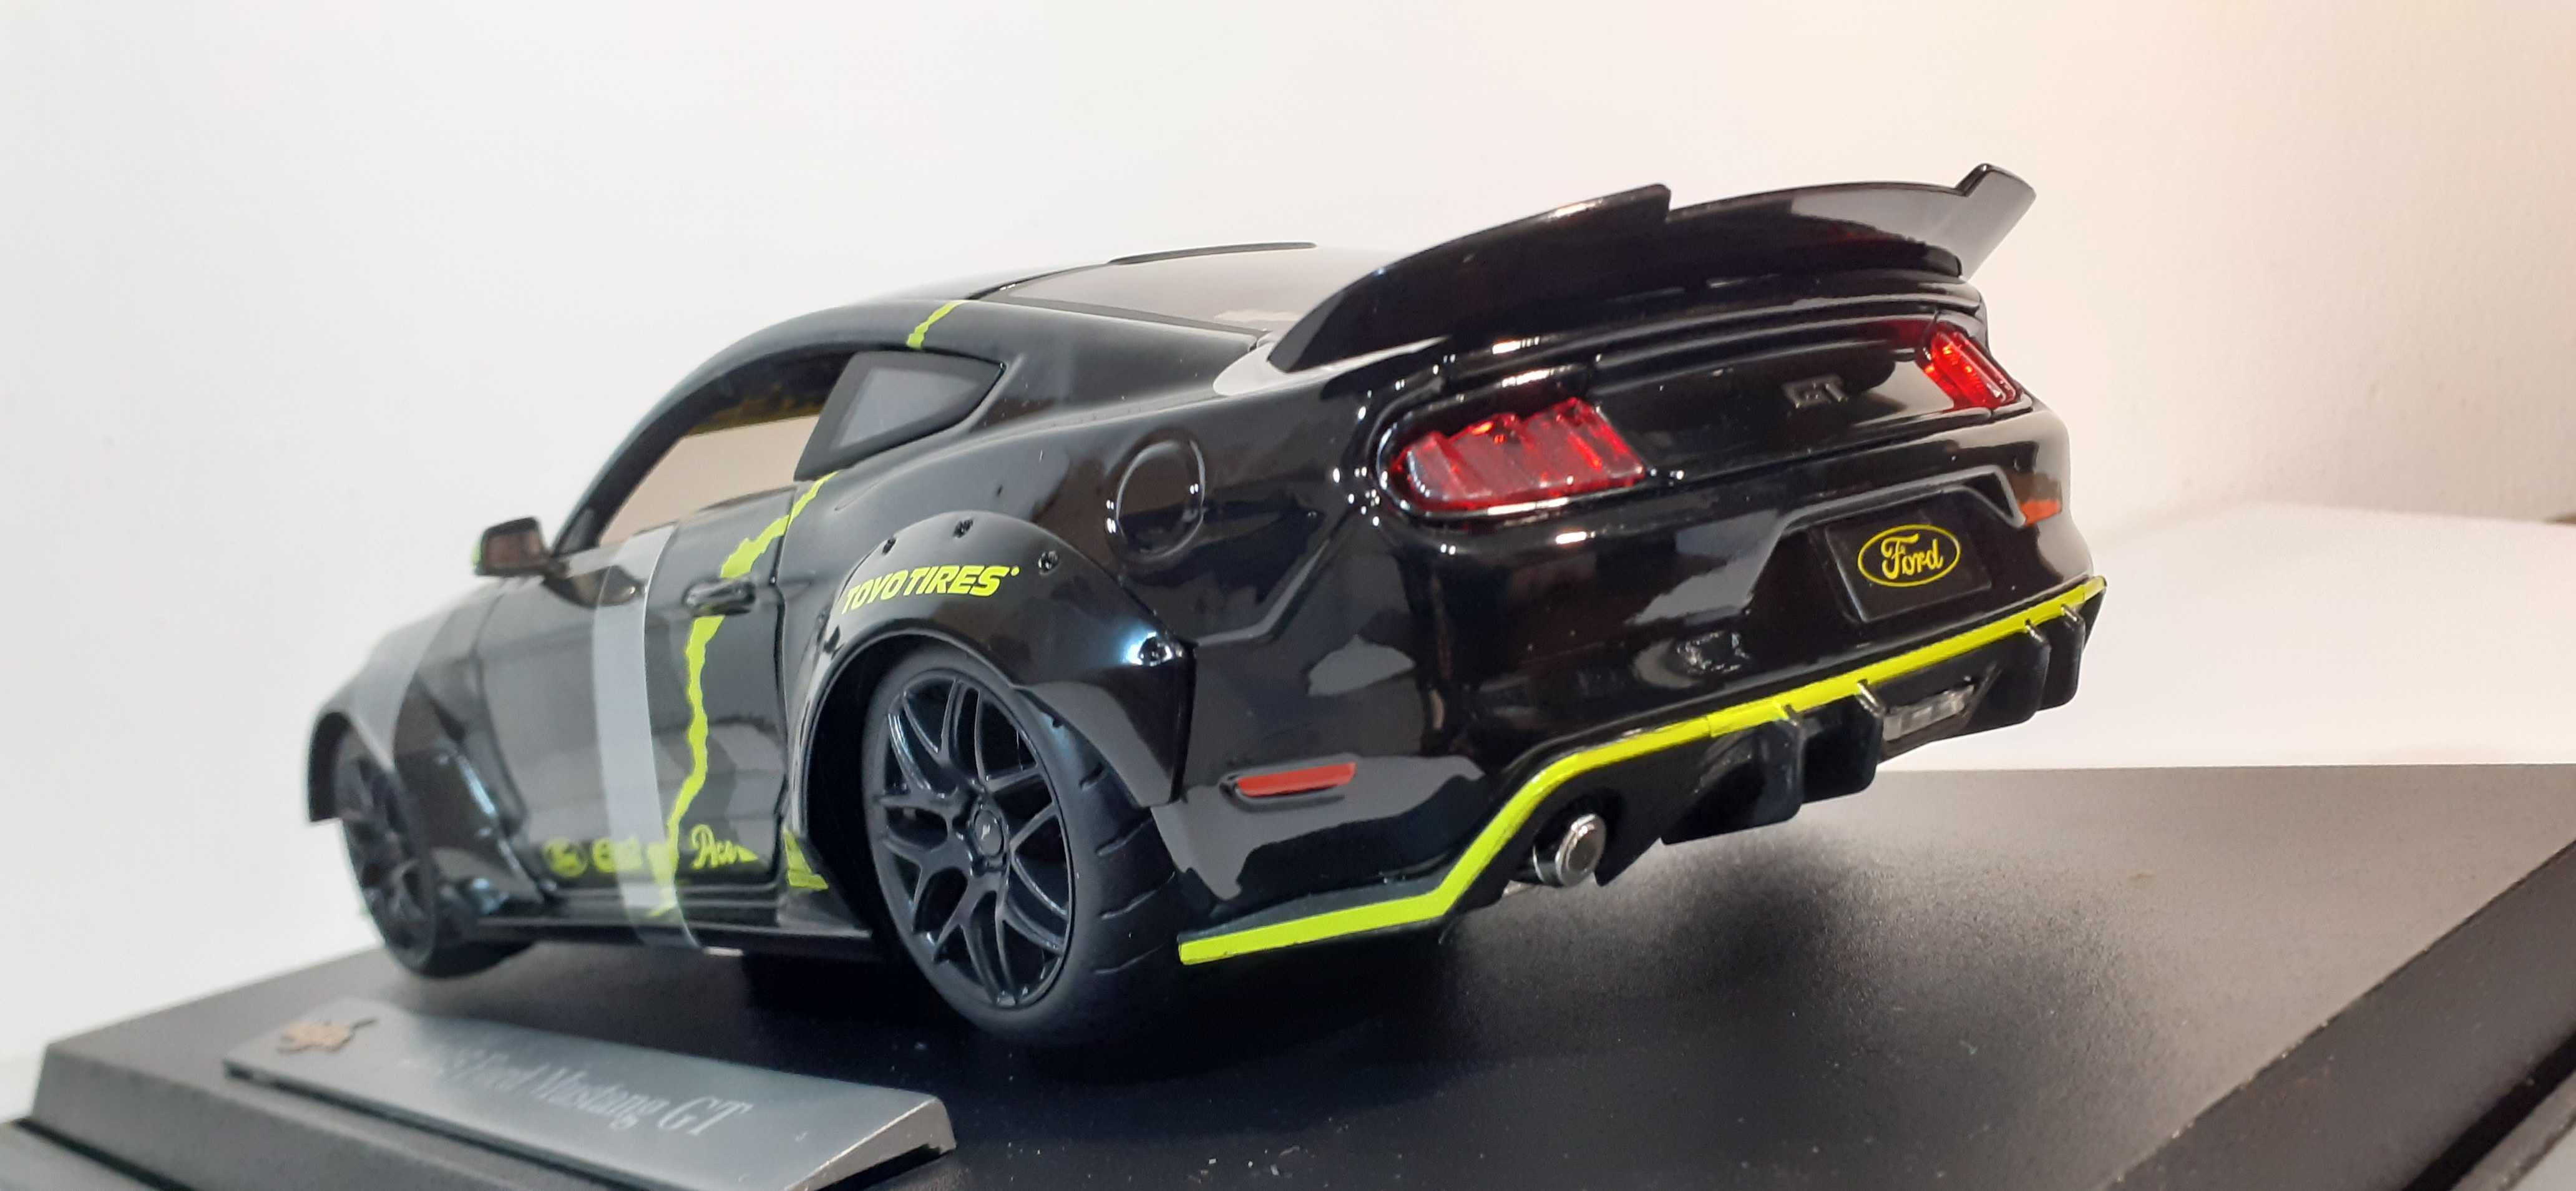 1/18 Ford Mustang Gt cz - Maisto